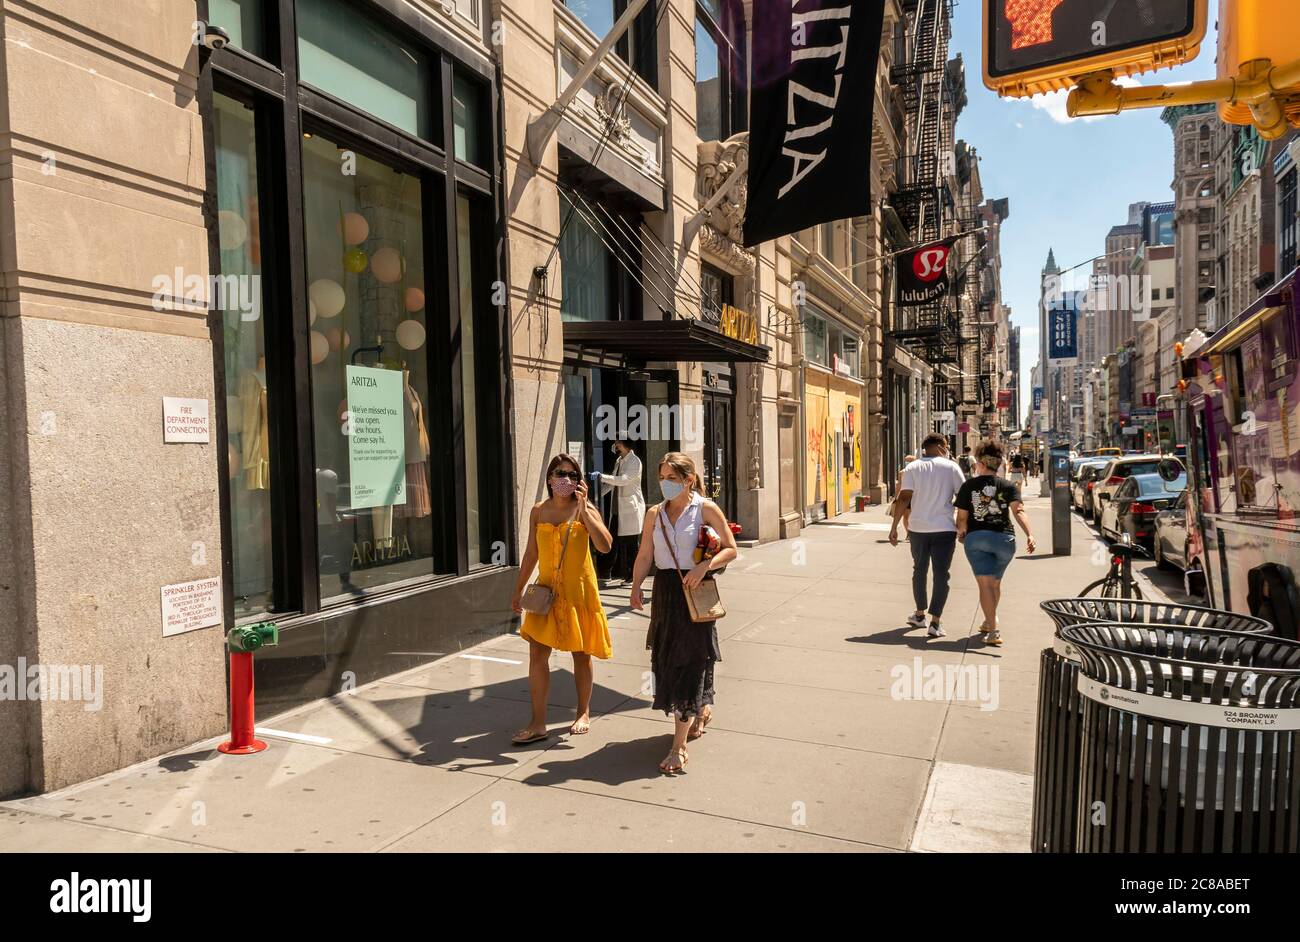 Shoppers in the Soho neighborhood of New York on Sunday, July 12, 2020. As part of the Phase 3 reopening in New York stores are allowed in-store shopping with restrictions. (© Richard B. Levine) Stock Photo